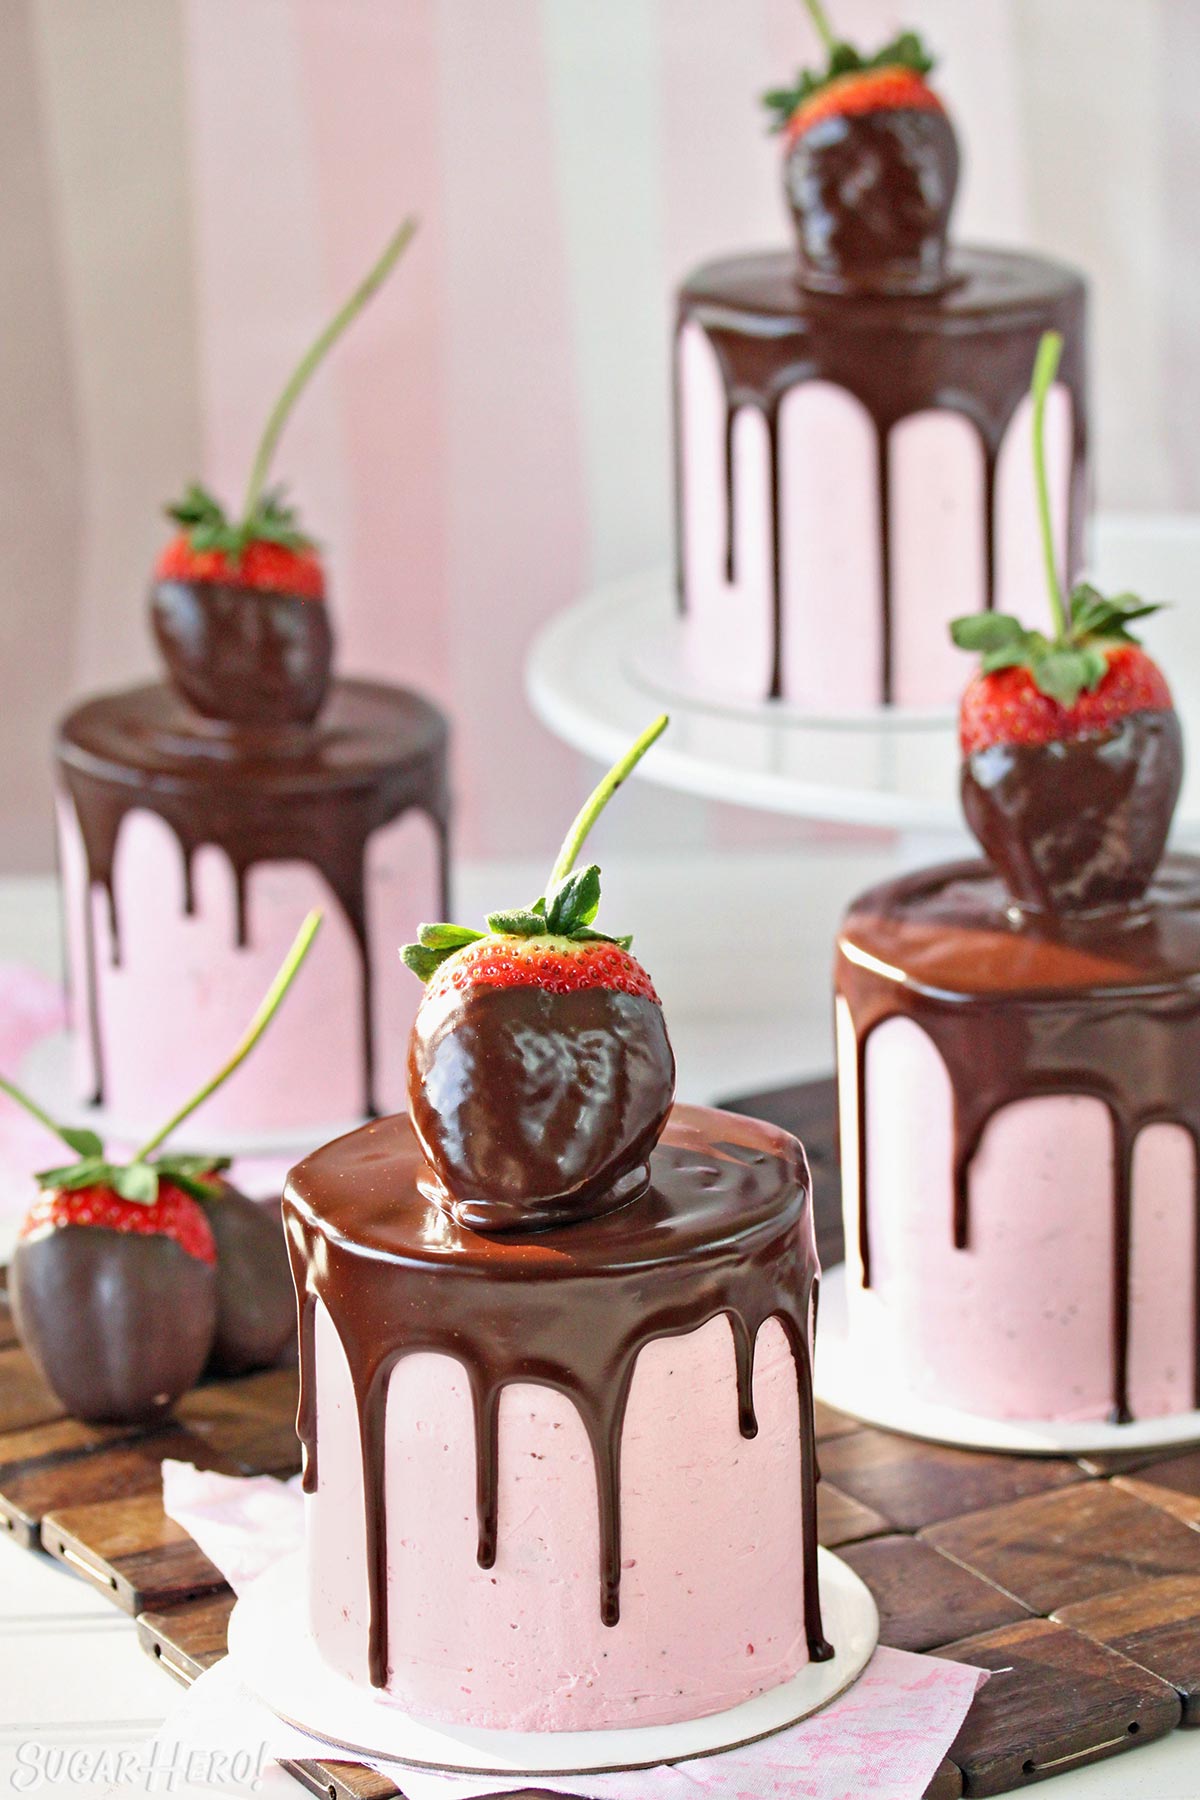 Four mini chocolate cakes, covered with strawberry buttercream, a chocolate drip, and a chocolate-dipped strawberry on top.